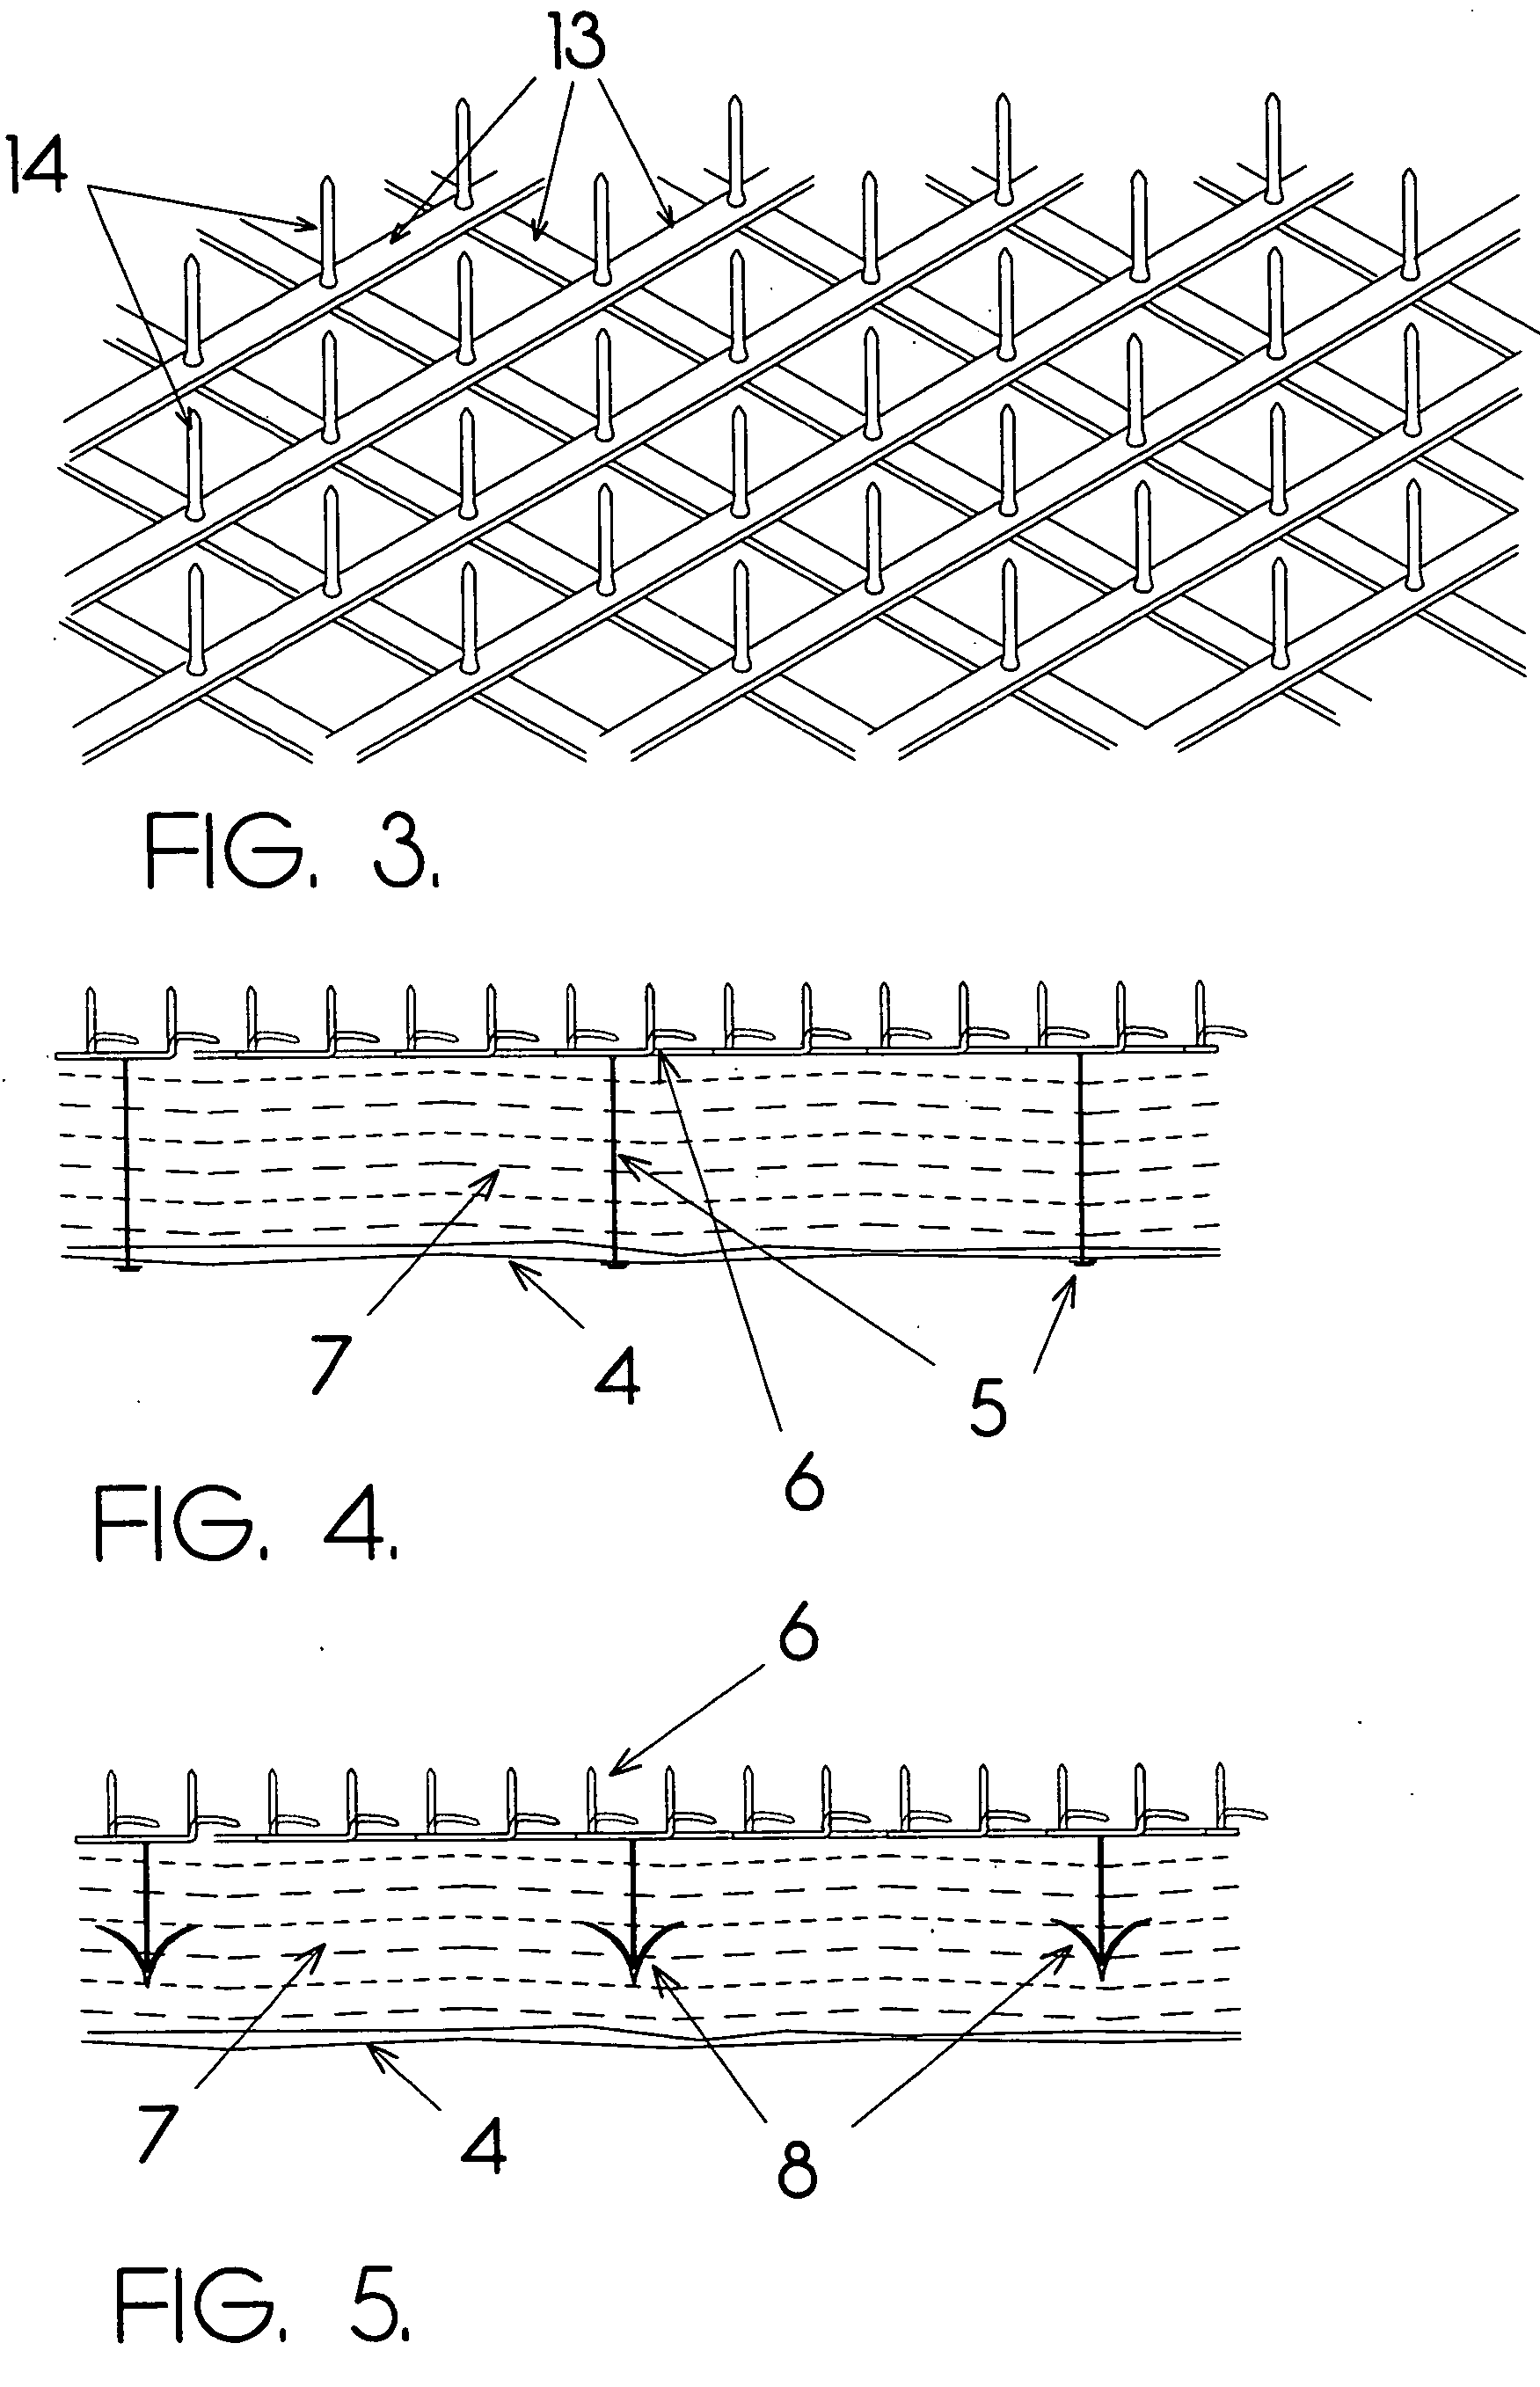 Device and method to provide air circulation space proximate to insulation material